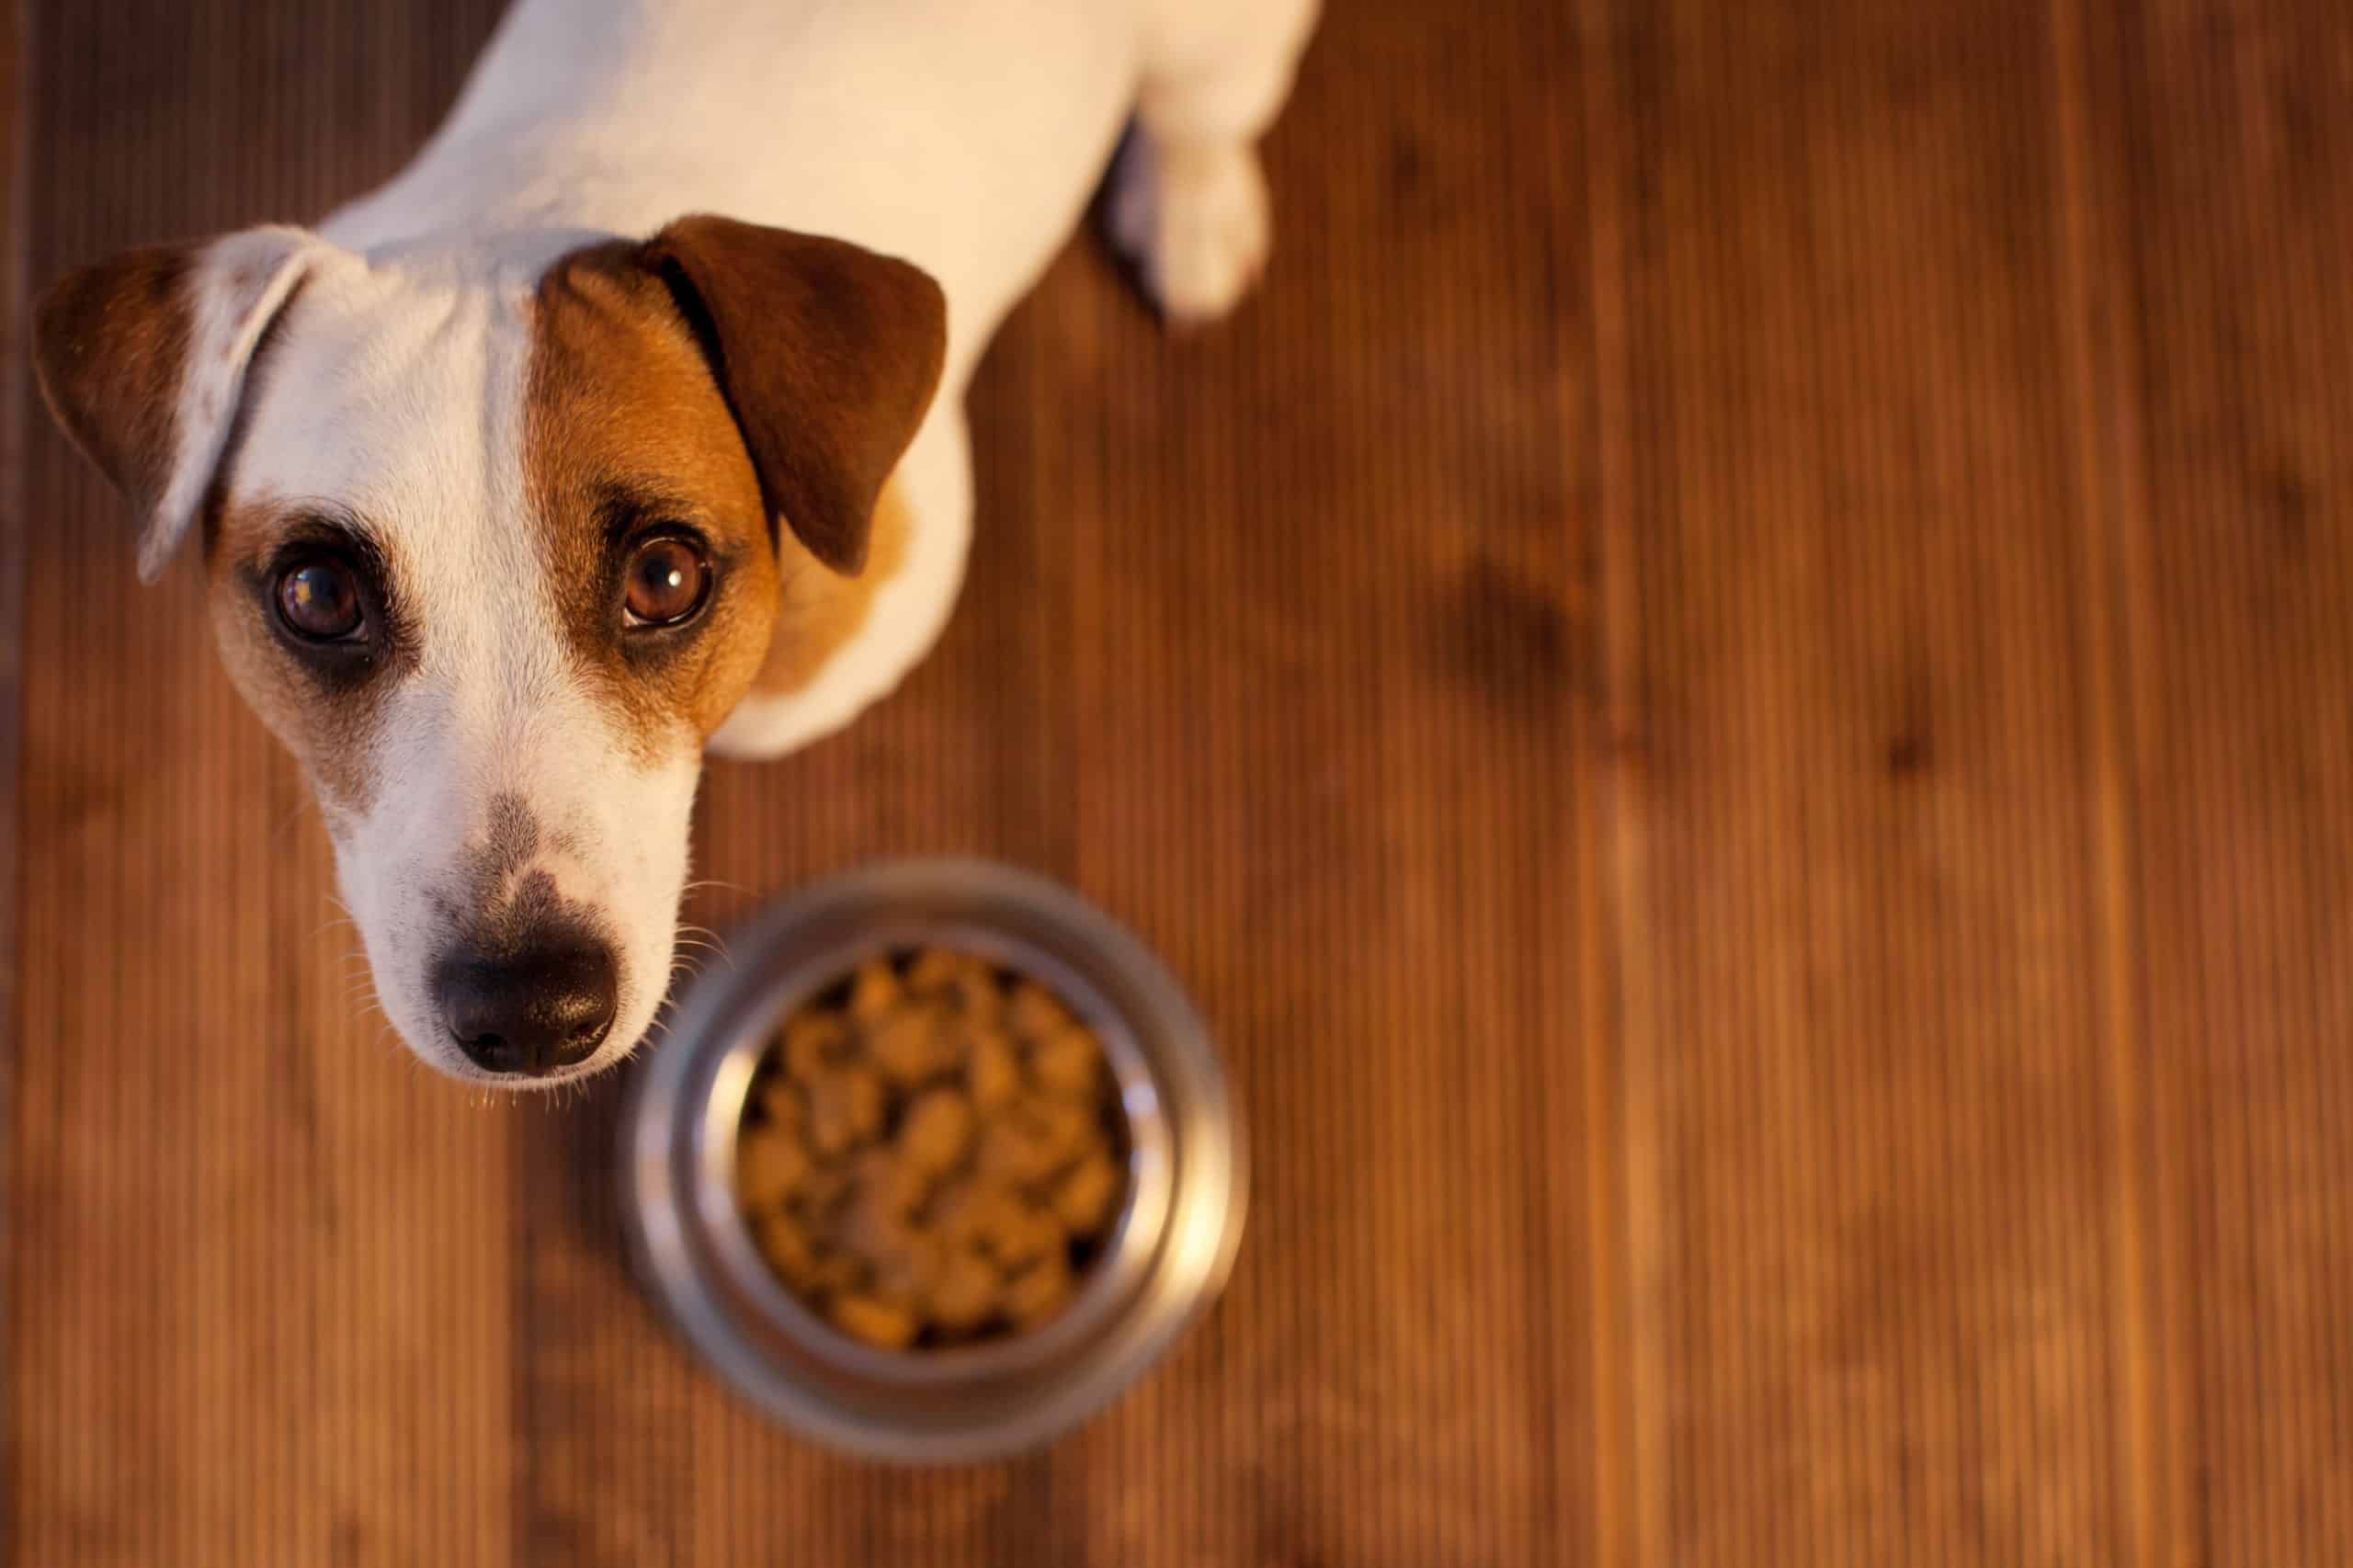 Why does my dog shake while eating?